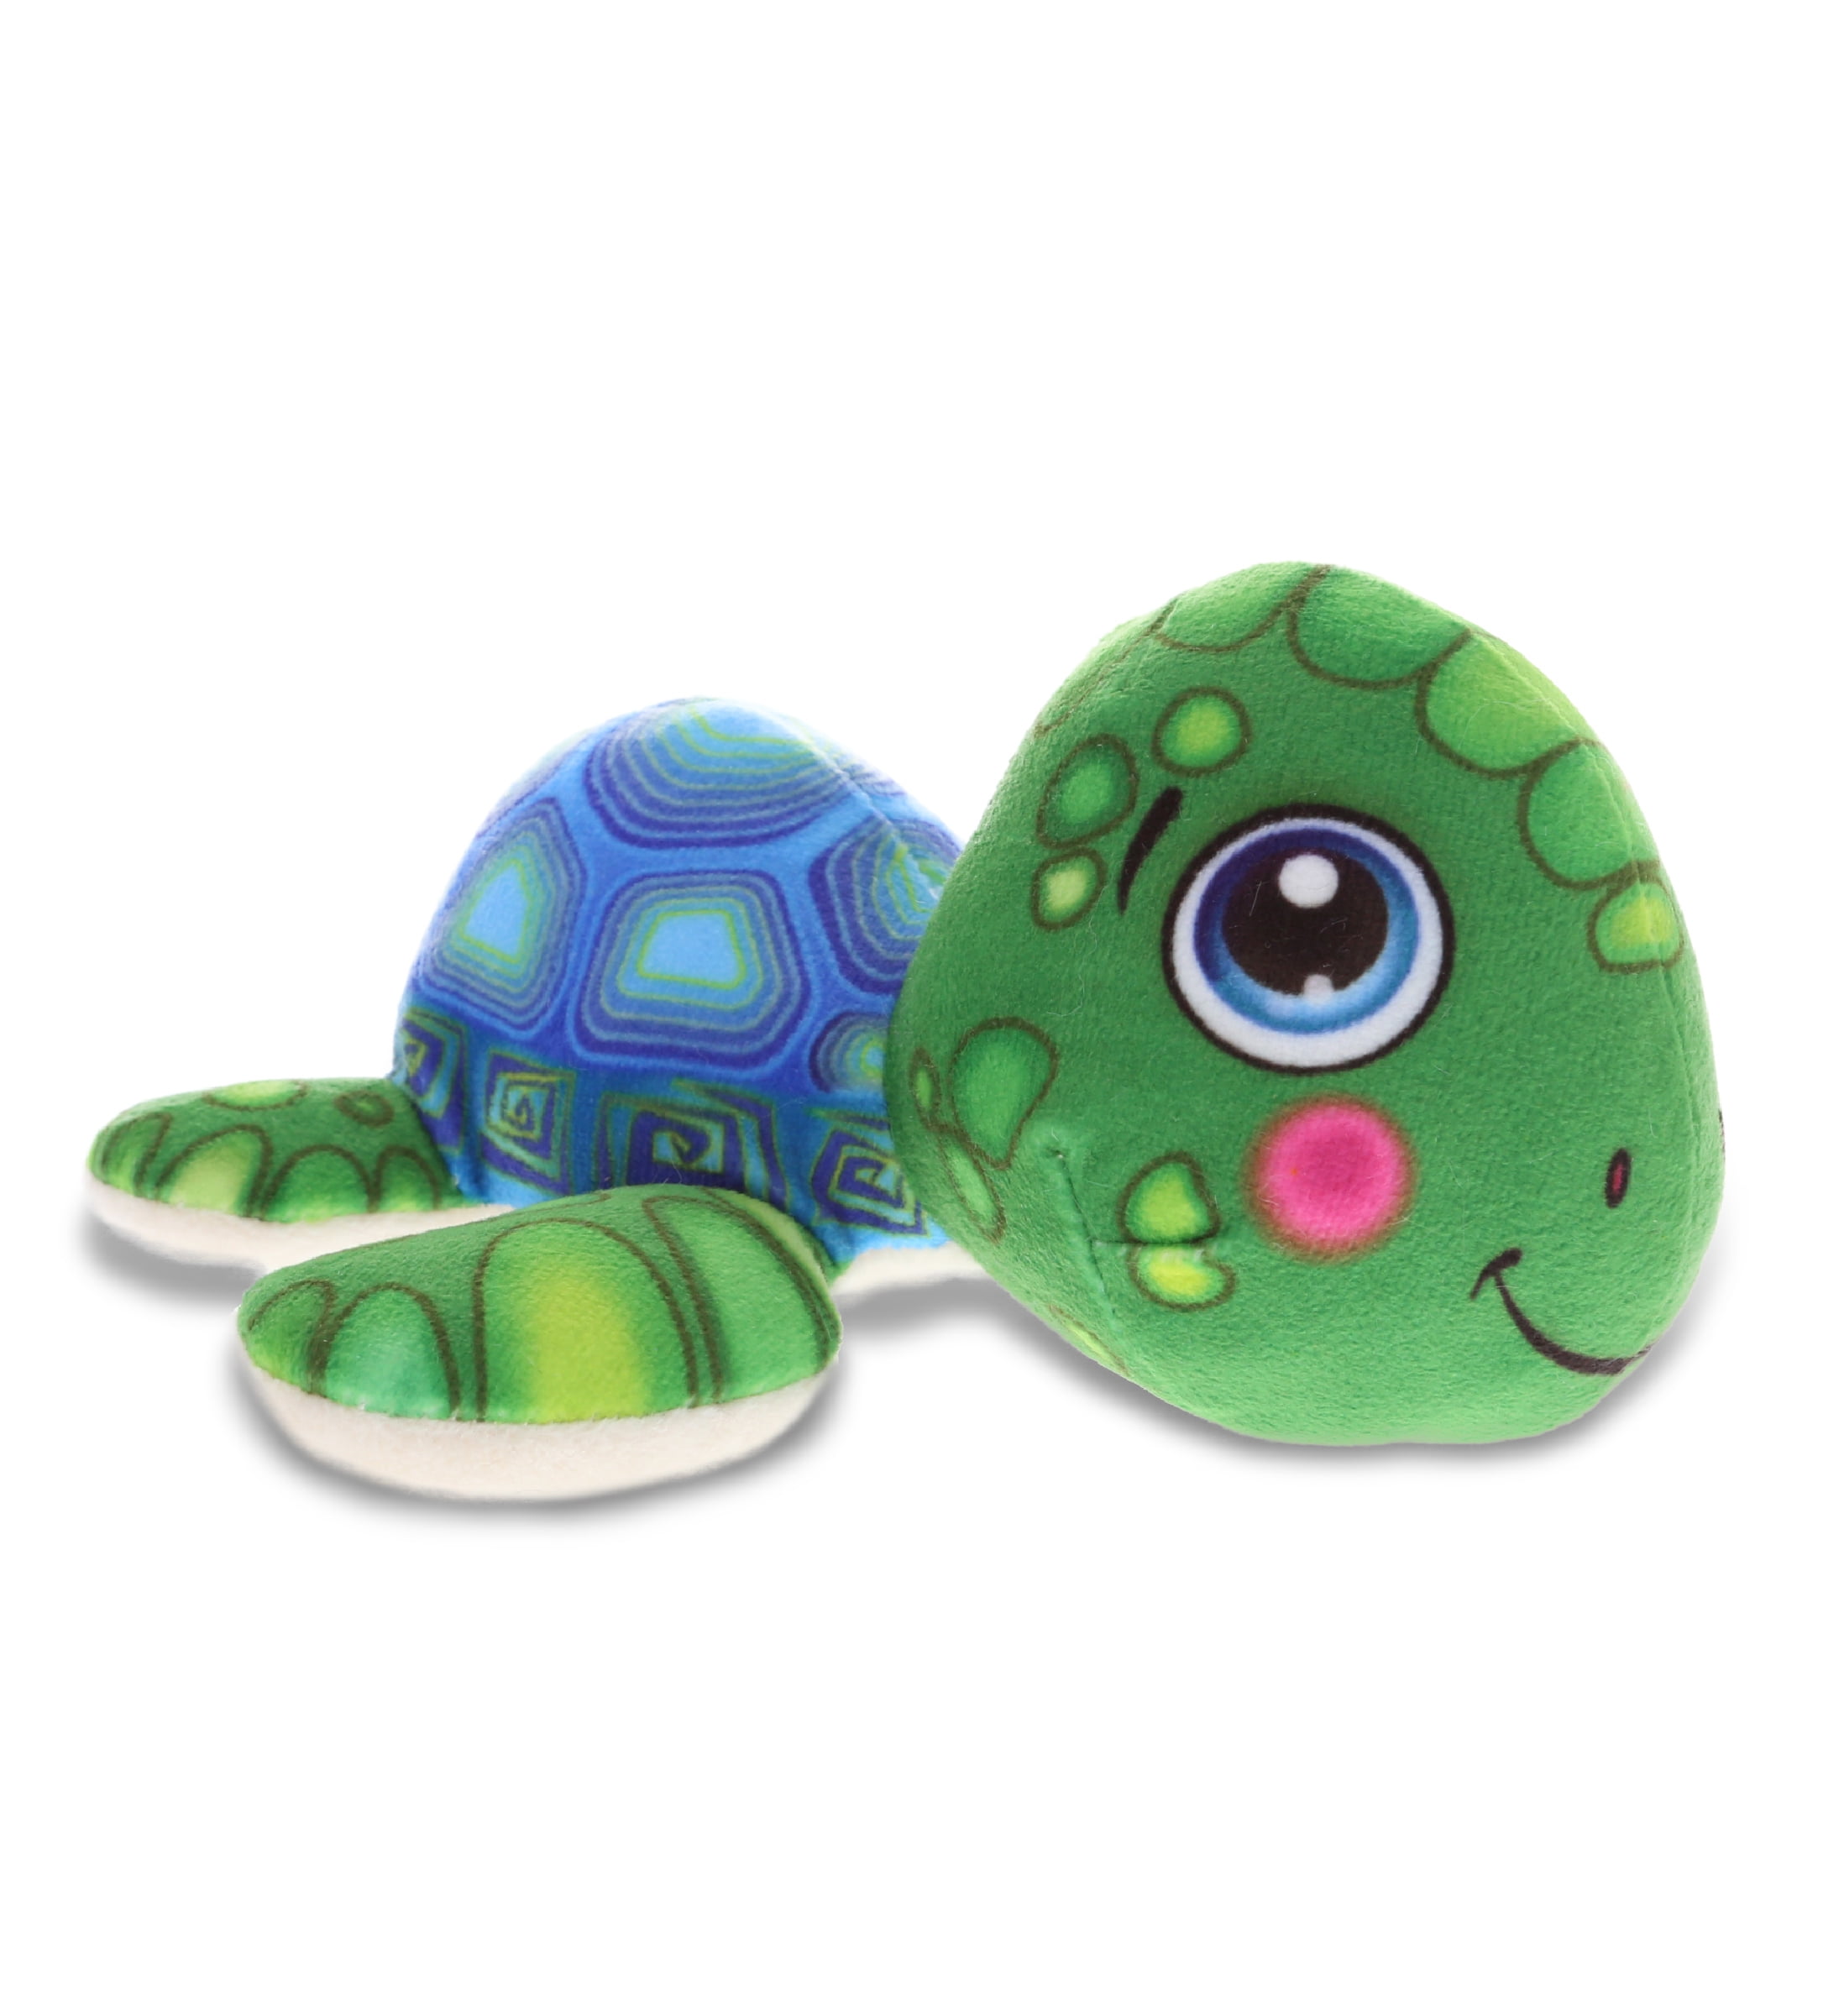 DolliBu Sea Turtle Plush Trolley & Purse Set - 3-in-1 Kids Trolley, Backpack,  & Green Turtle Purse, Soft Plush Backpack on Wheels, School Rolling Bag,  Travel Luggage with Removable Plush Toy 